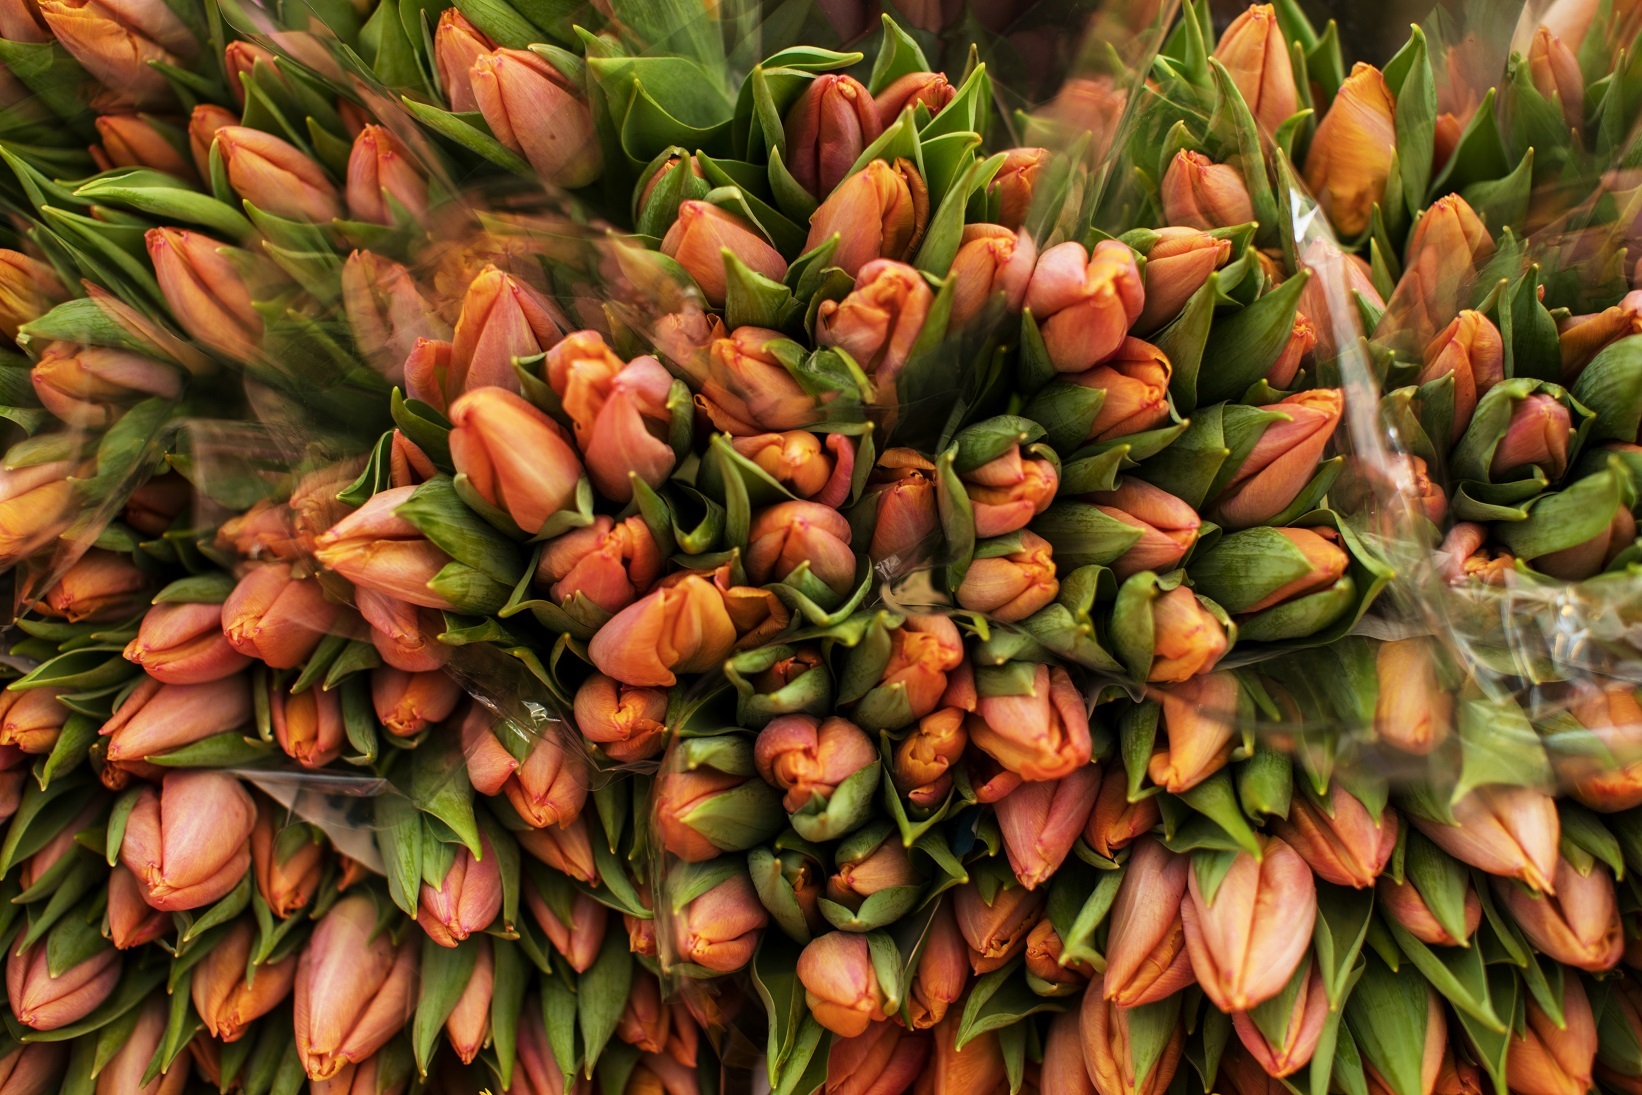 Bunches of tulips sit on display on a florist\'s stall at Albert Cuyp street market in Amsterdam, Netherlands, on Tuesday, Jan. 3, 2017. The Netherlands will probably have a balanced government budget in 2017, according to Dutch planning Agency CPB.